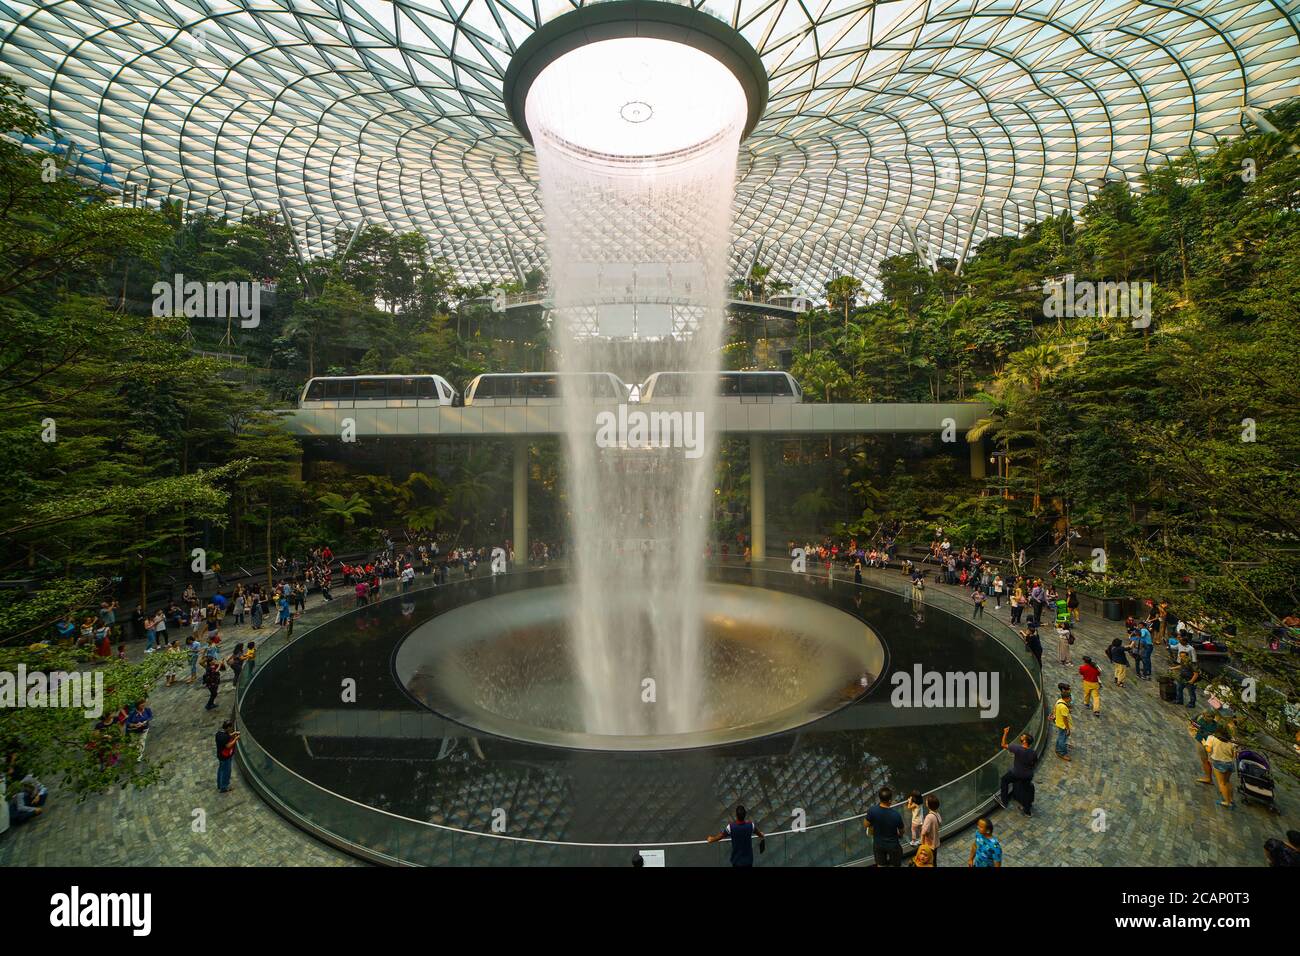 The Rain Vortex, a 40m-tall indoor waterfall located inside the Jewel Changi Airport in Singapore. Jewel Changi Airport is set to open on April 17, 20 Stock Photo